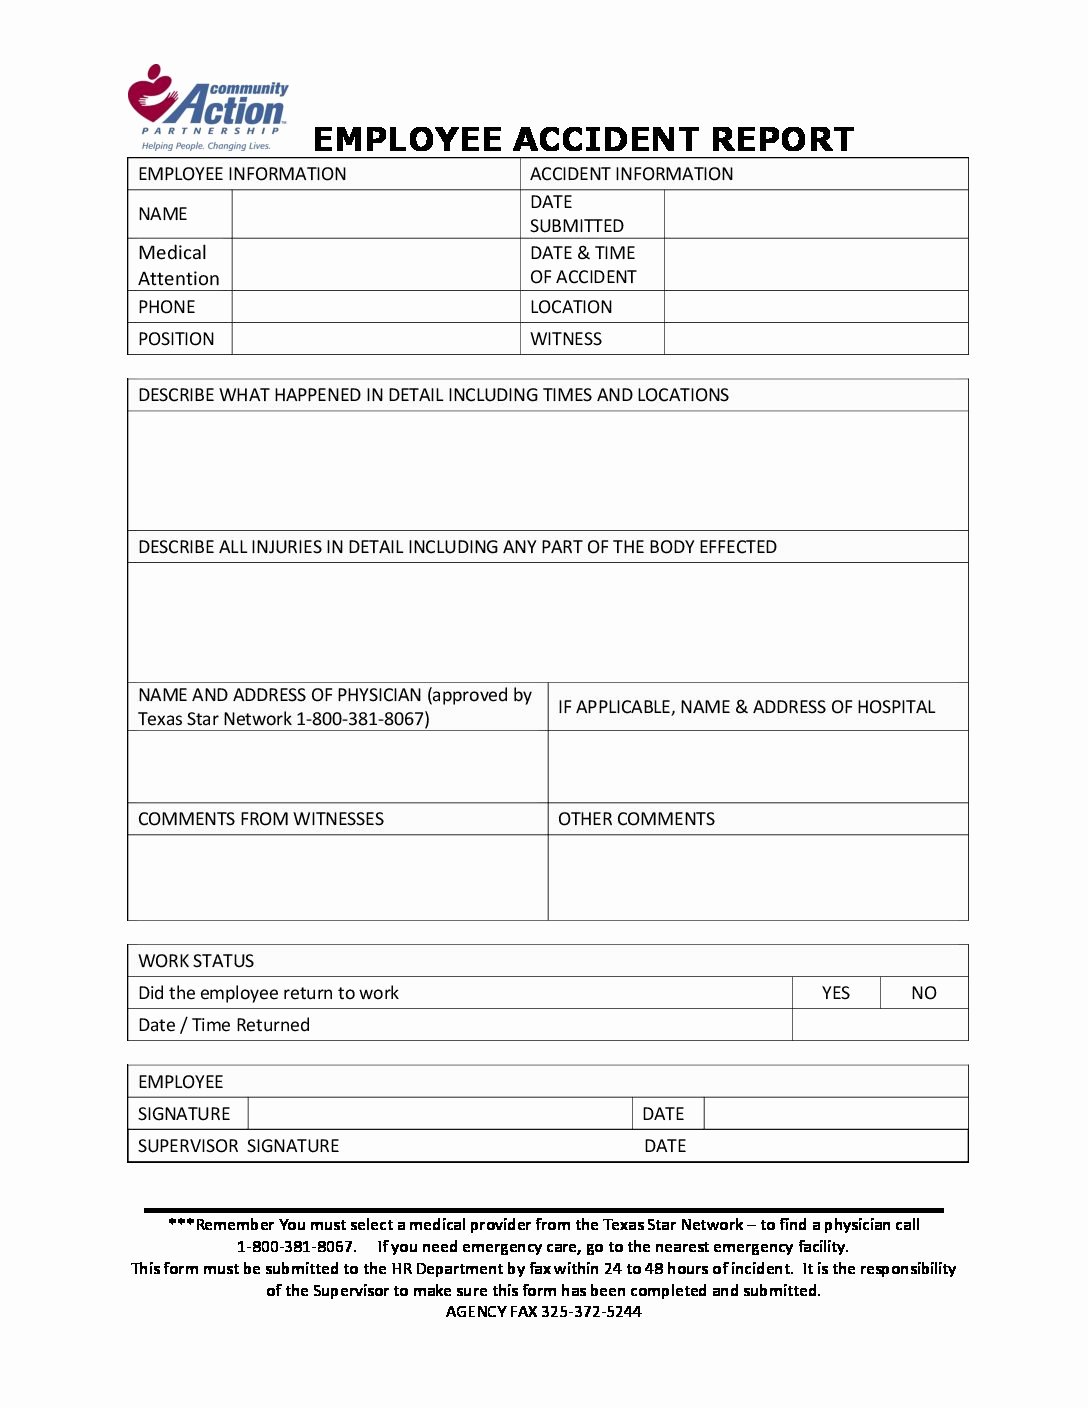 Accident Report form Pdf Inspirational Accident Report form 2017 2 – Hill Country Munity